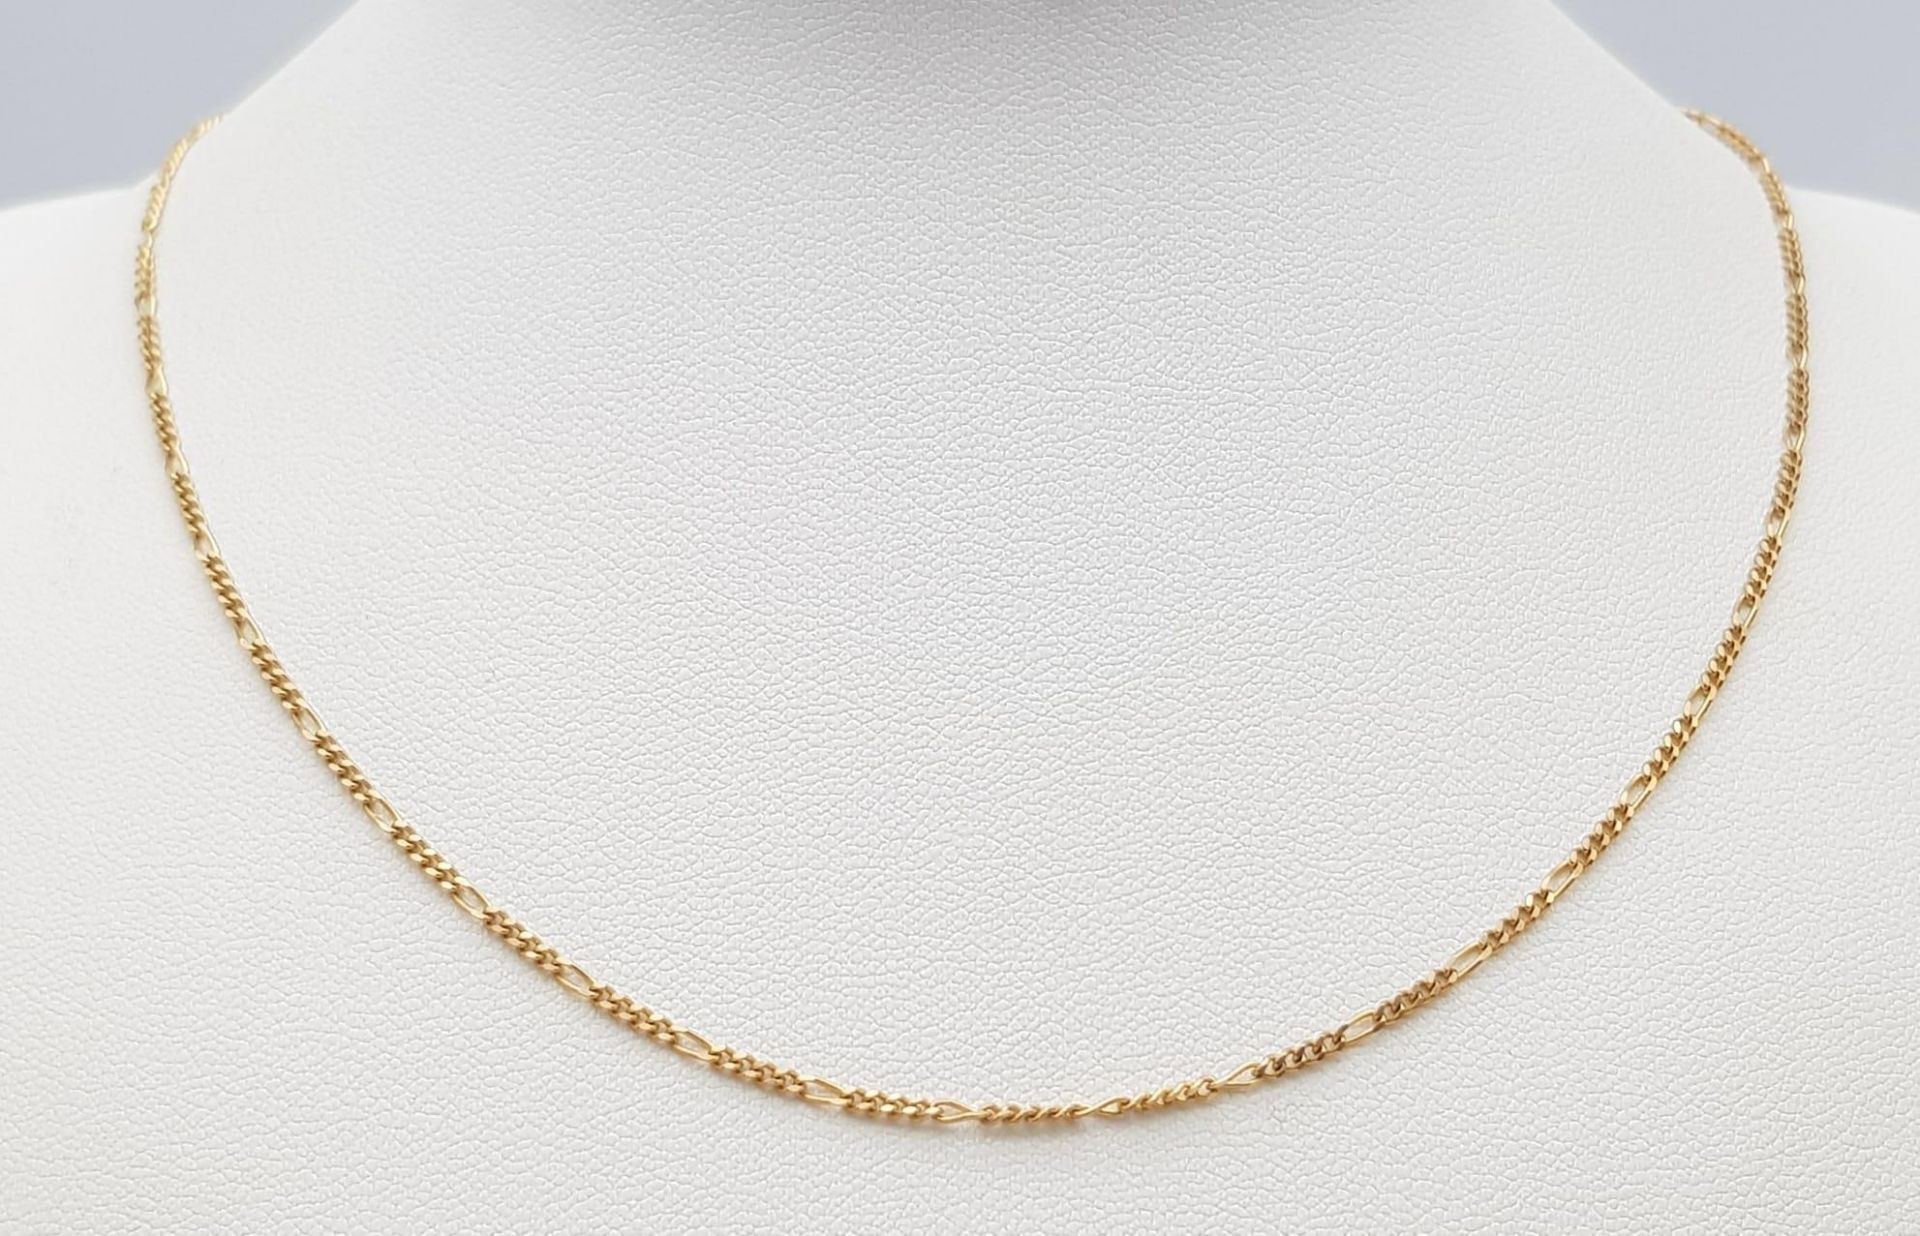 A 9K Yellow Gold Disappearing Necklace. 40cm. 2.2g weight.